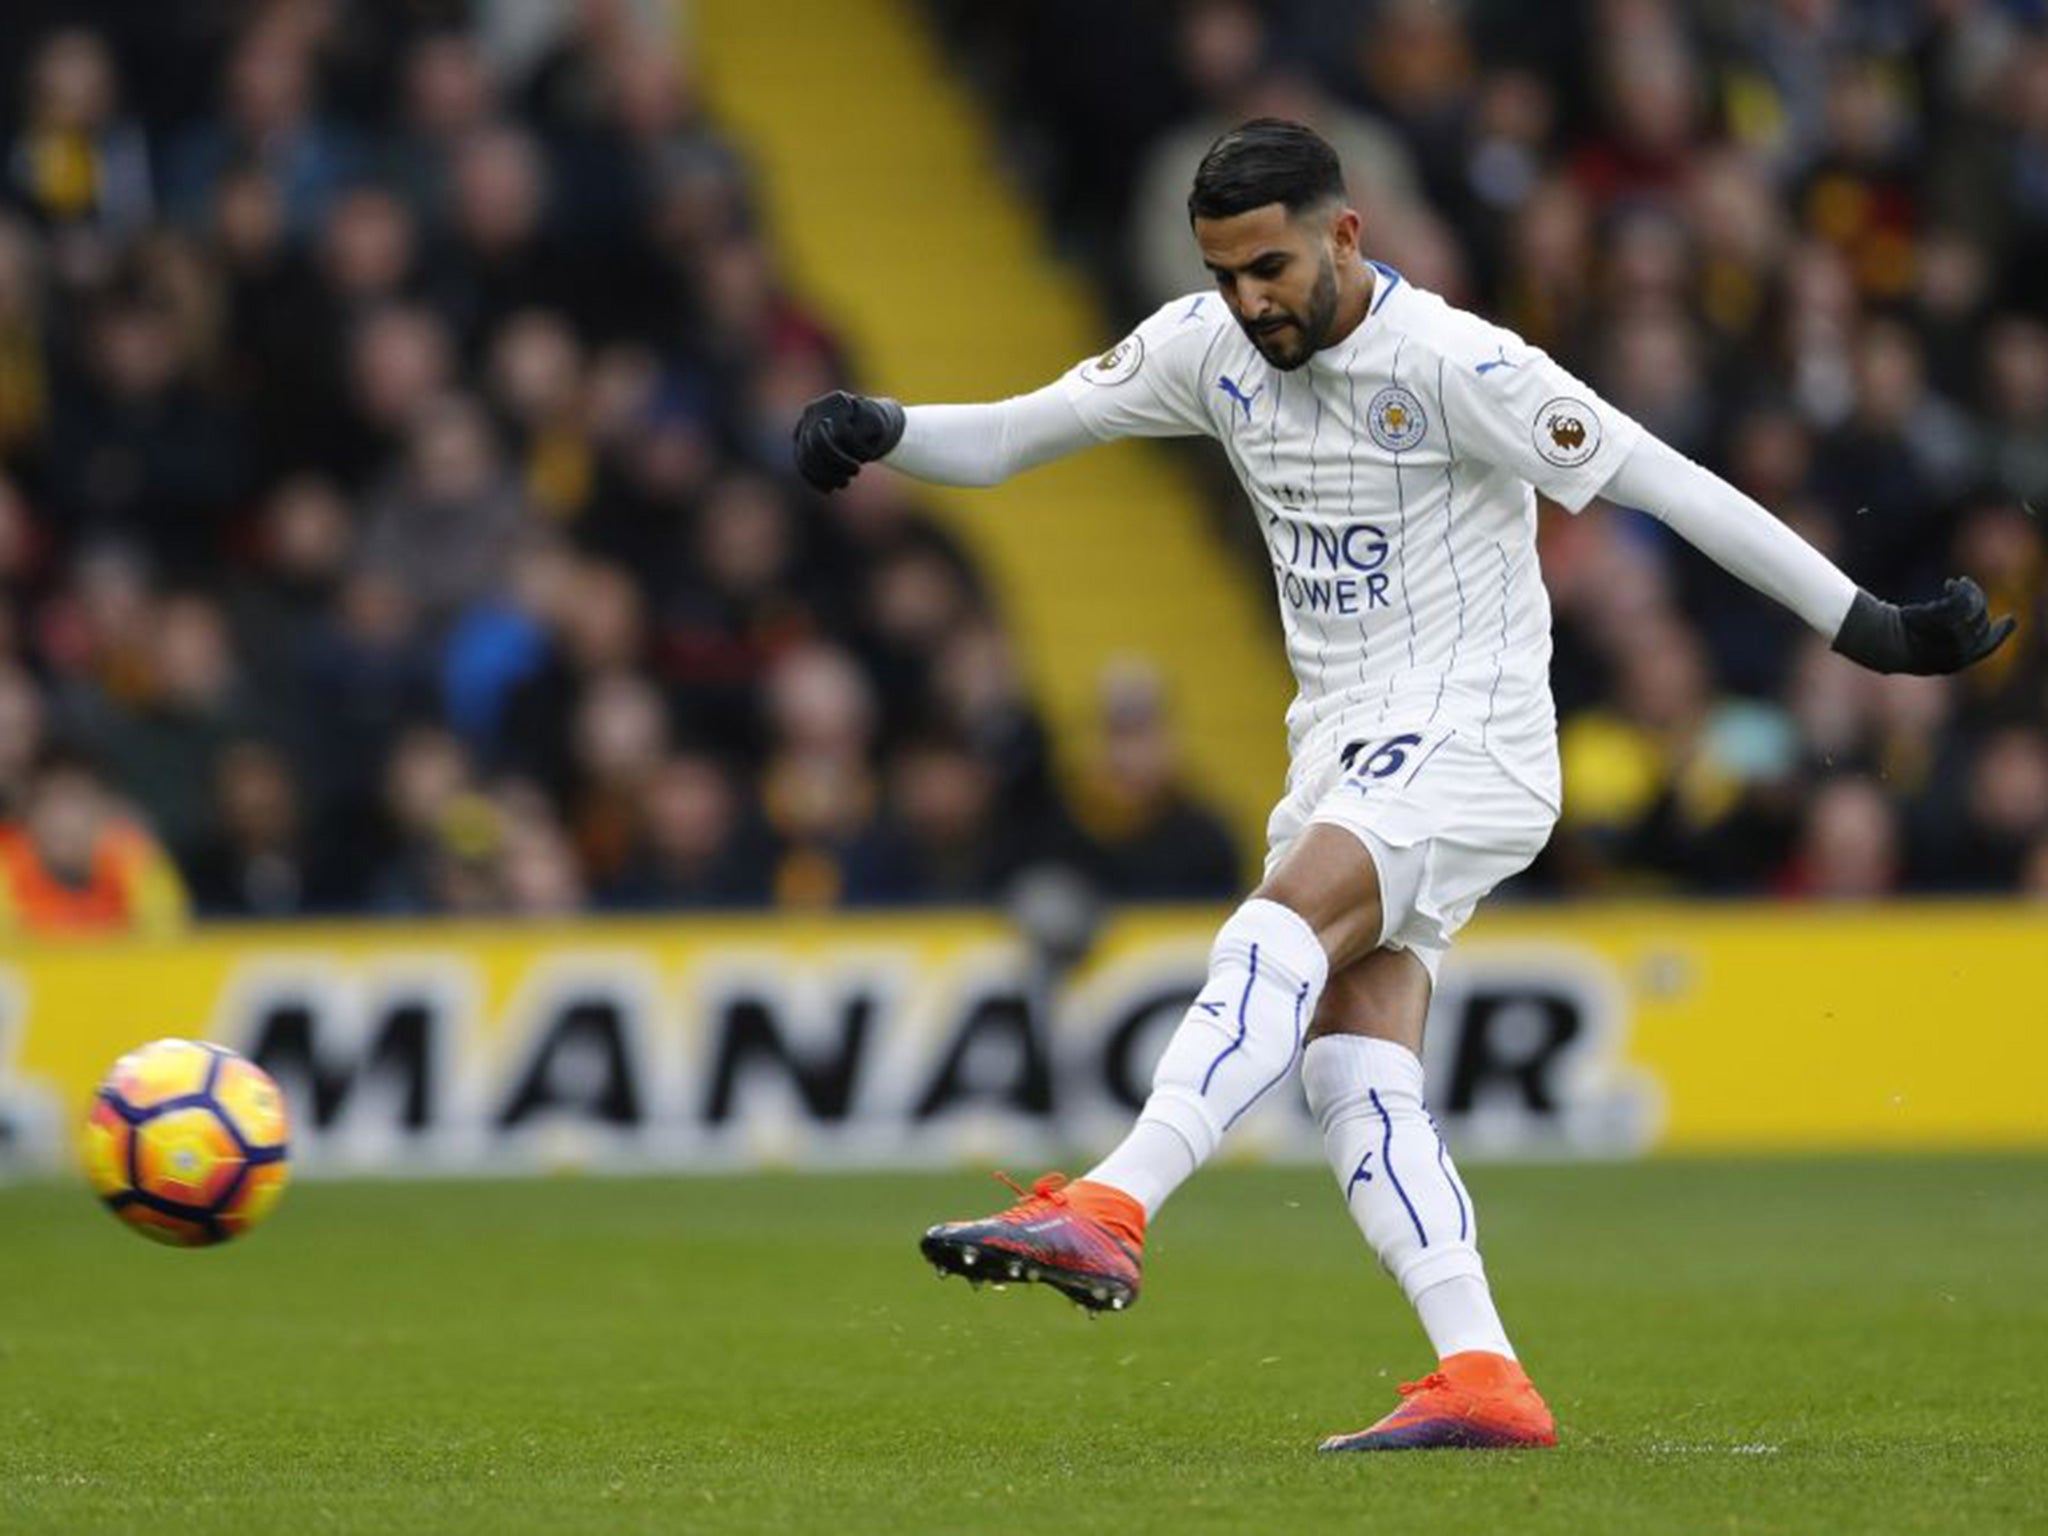 Mahrez pulled one back from the penalty spot